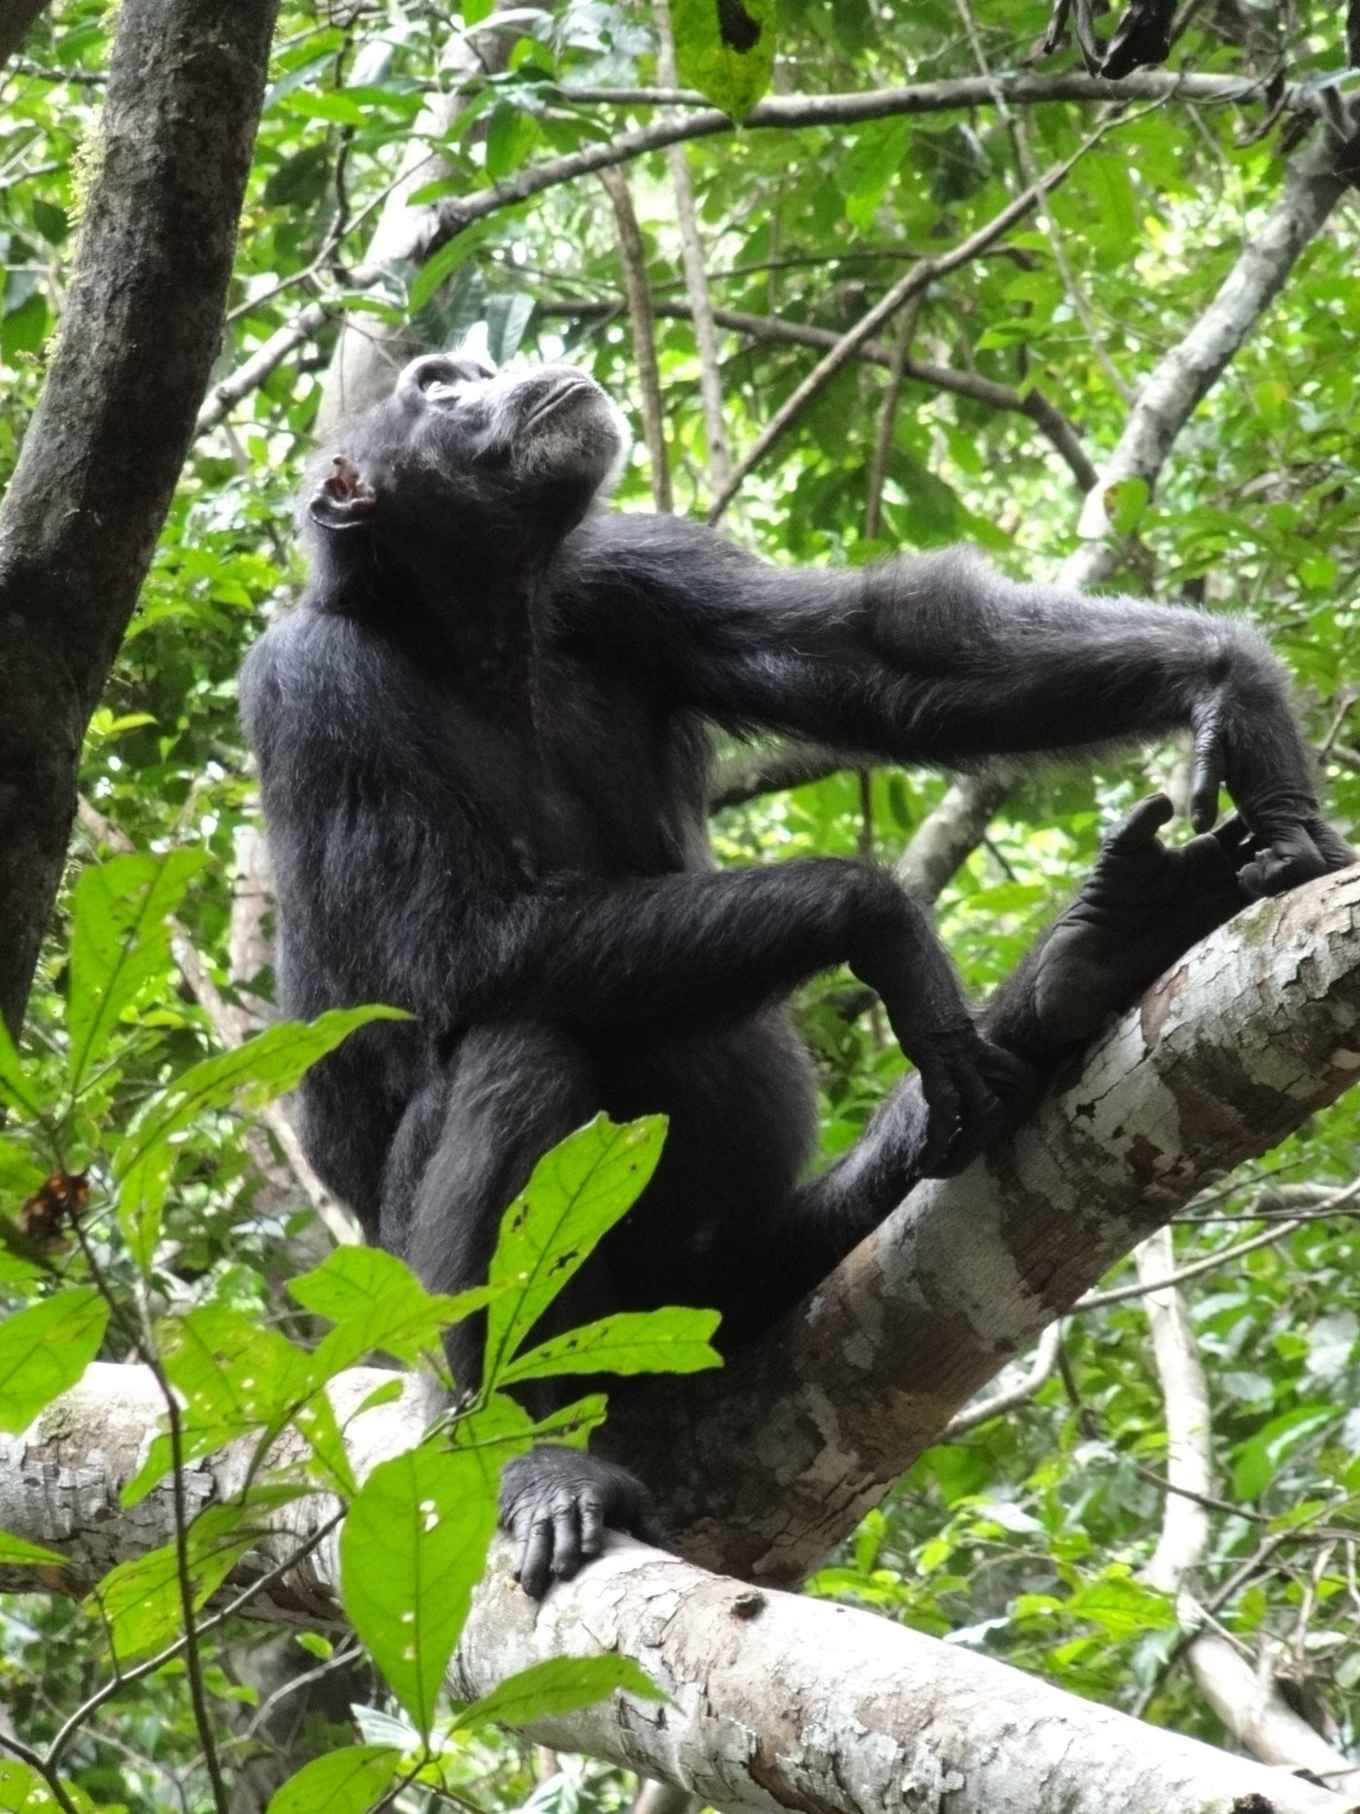 Chimpanzee inspecting a tree during a foraging trip on her own in the tropical rainforest of Tai National Park, Cote d’Ivoire. Picture: Karline Janmaat